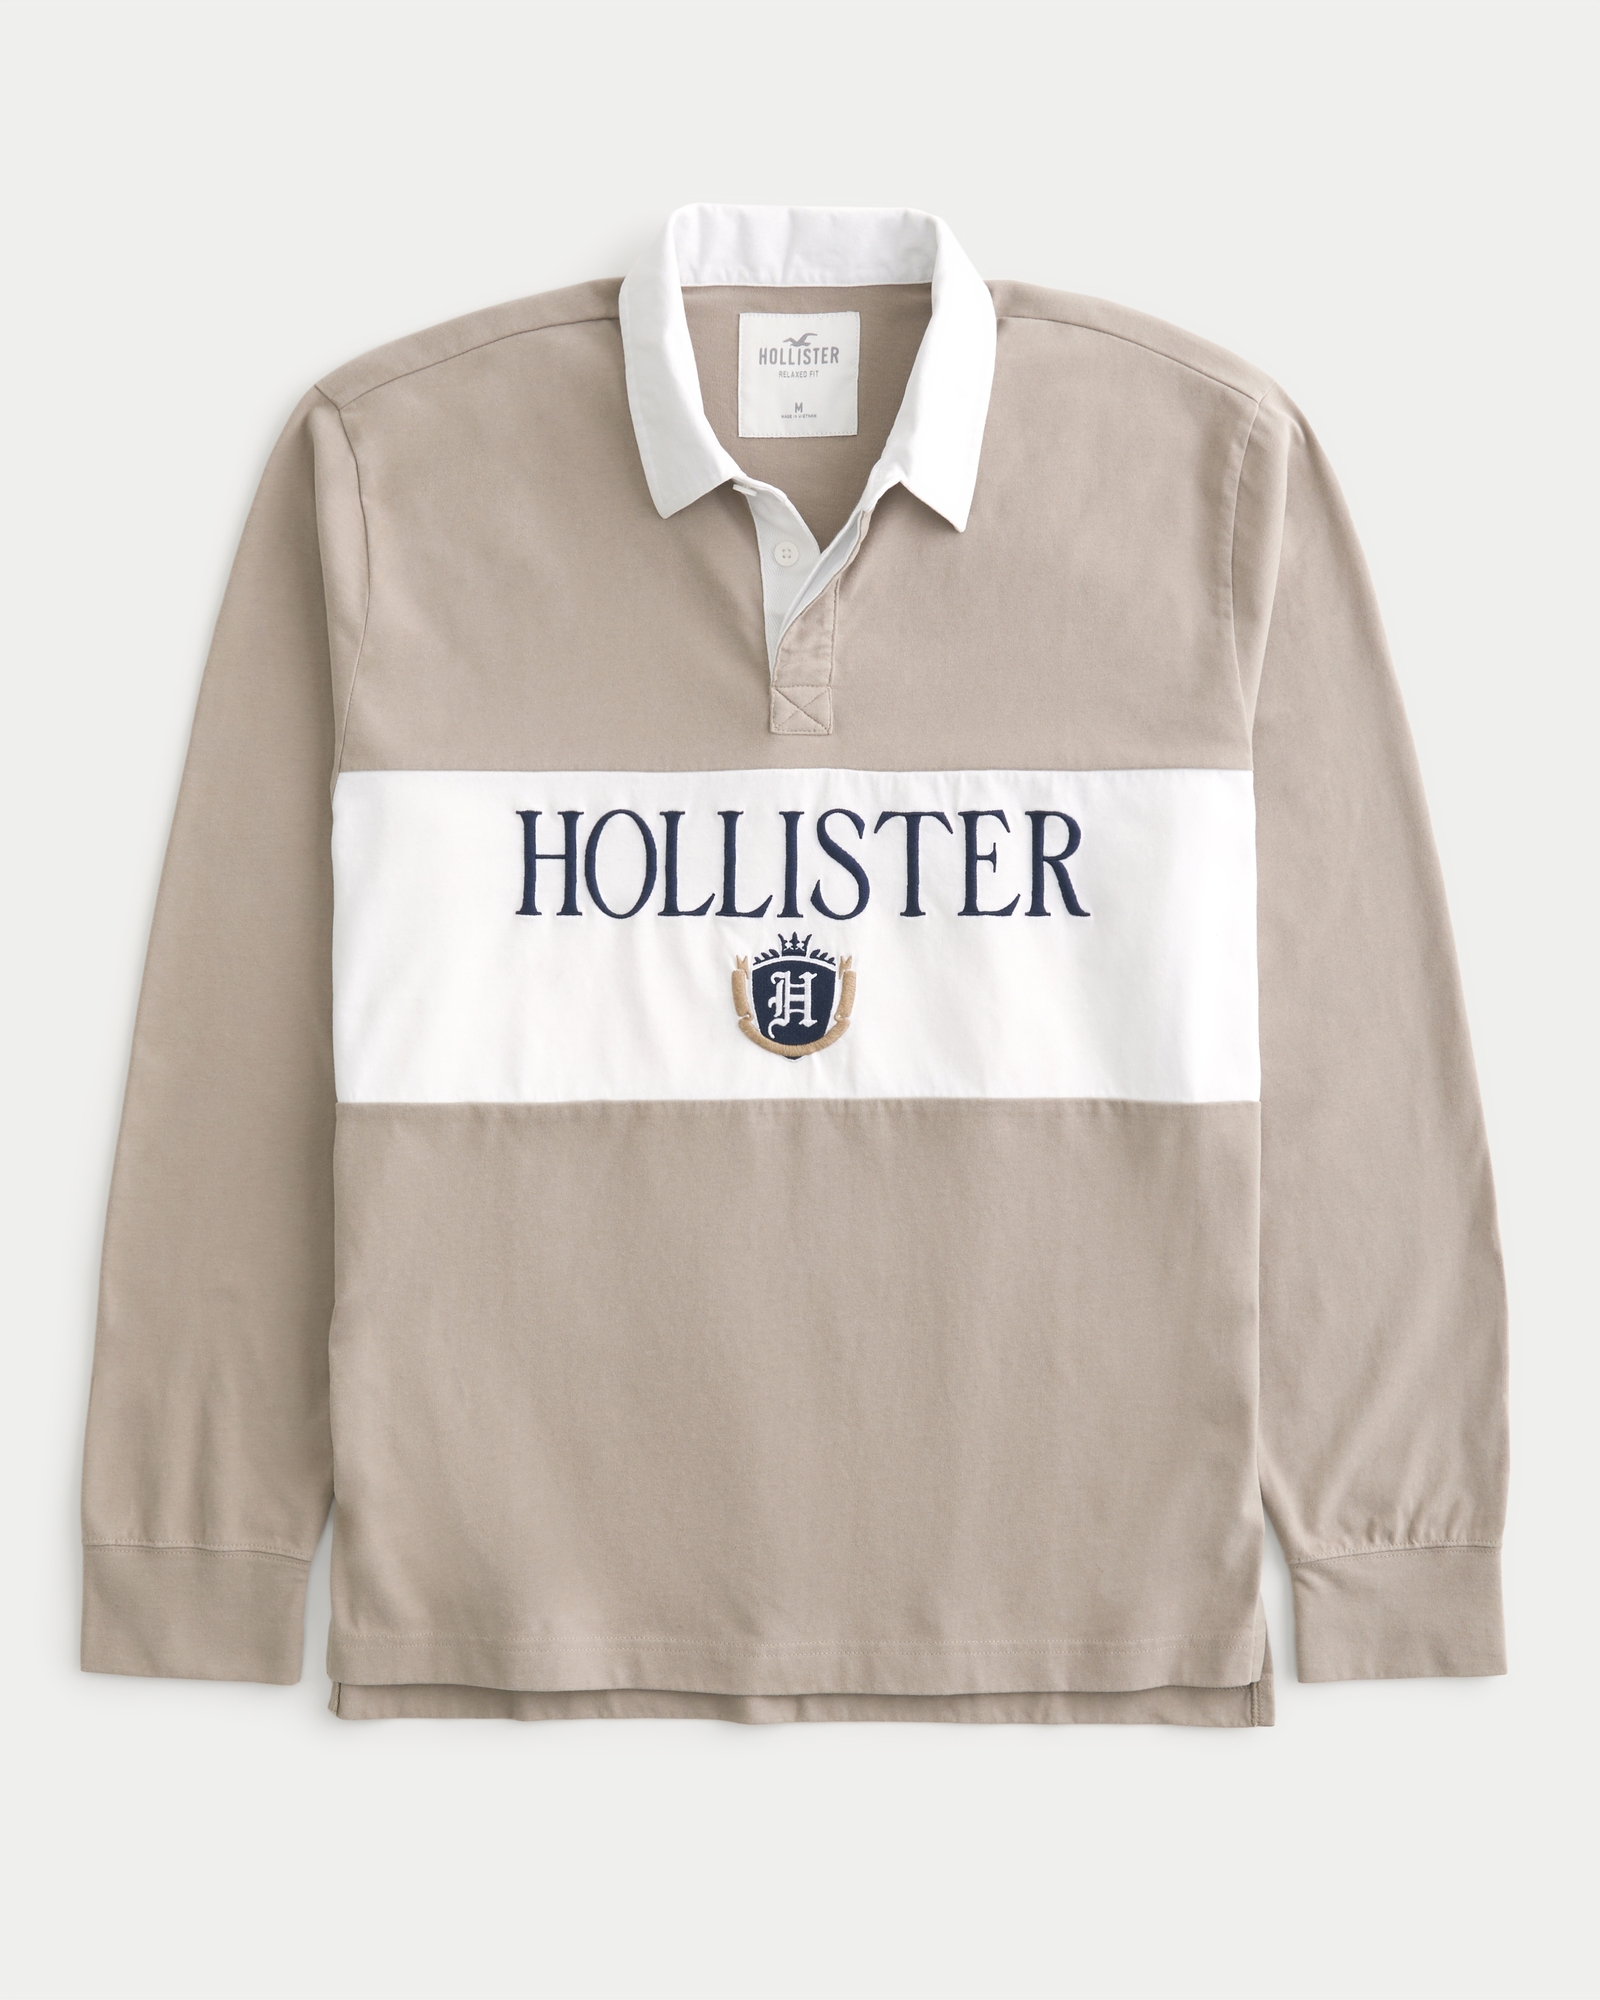 https://img.hollisterco.com/is/image/anf/KIC_324-3187-0004-409_prod1.jpg?policy=product-extra-large